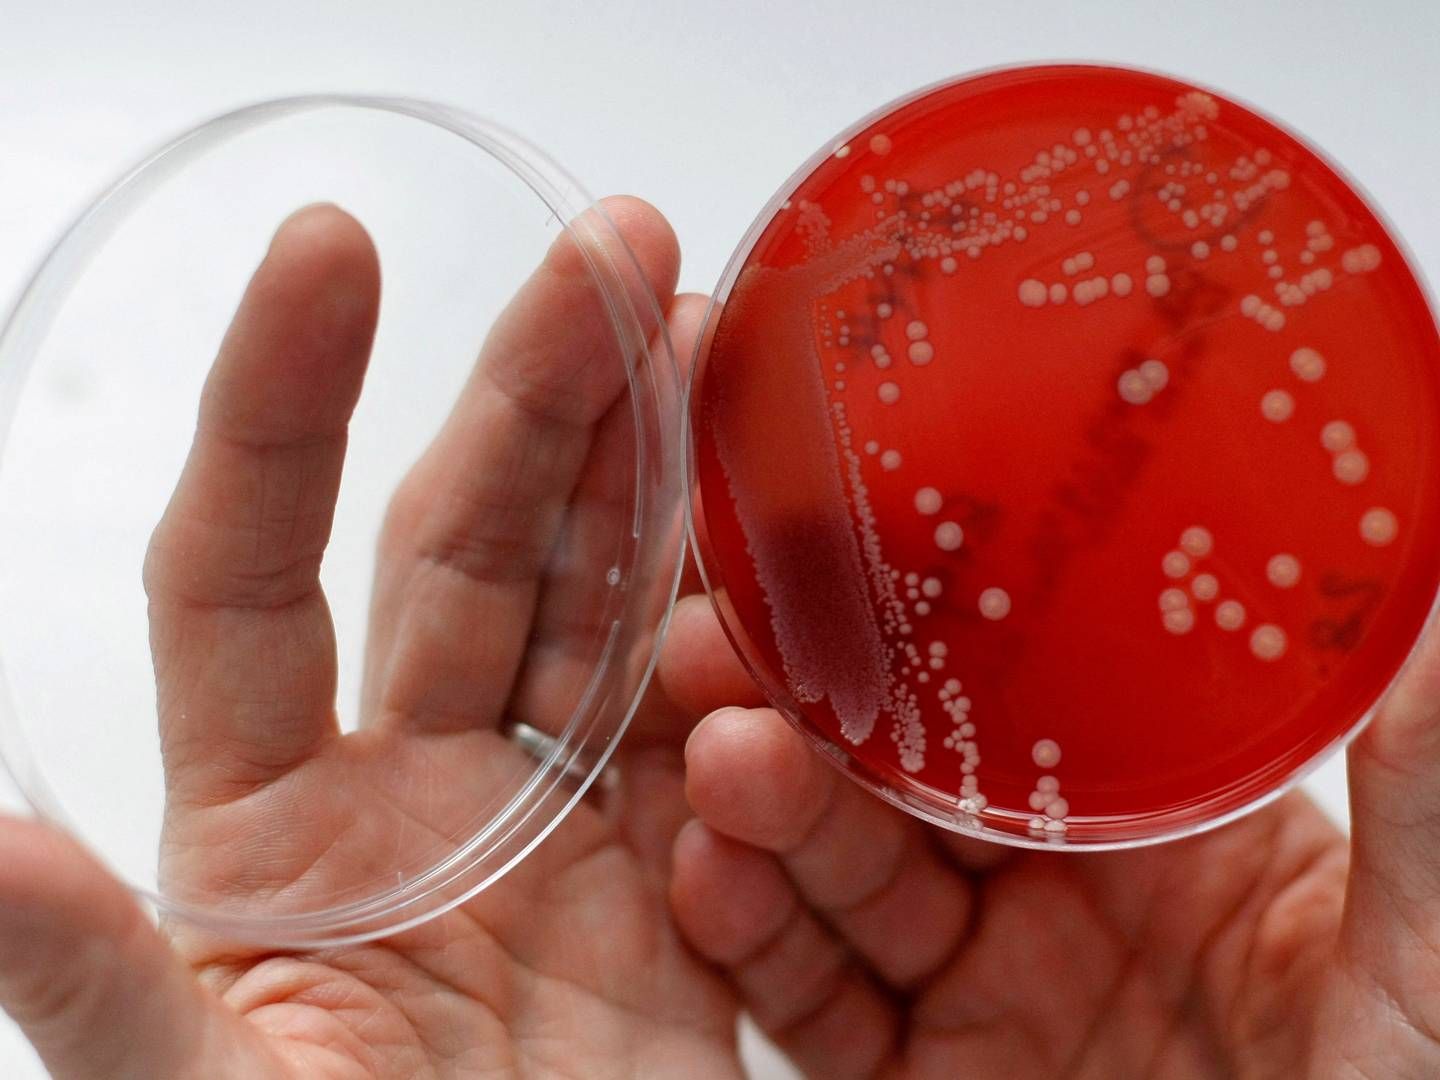 Two companies backed by Novo Holdings have come to the negotiating table and agreed on a license agreement that could lead to a new vaccine against antibiotic-resistant staphylococcus aureus (S. aureus) bacteria.